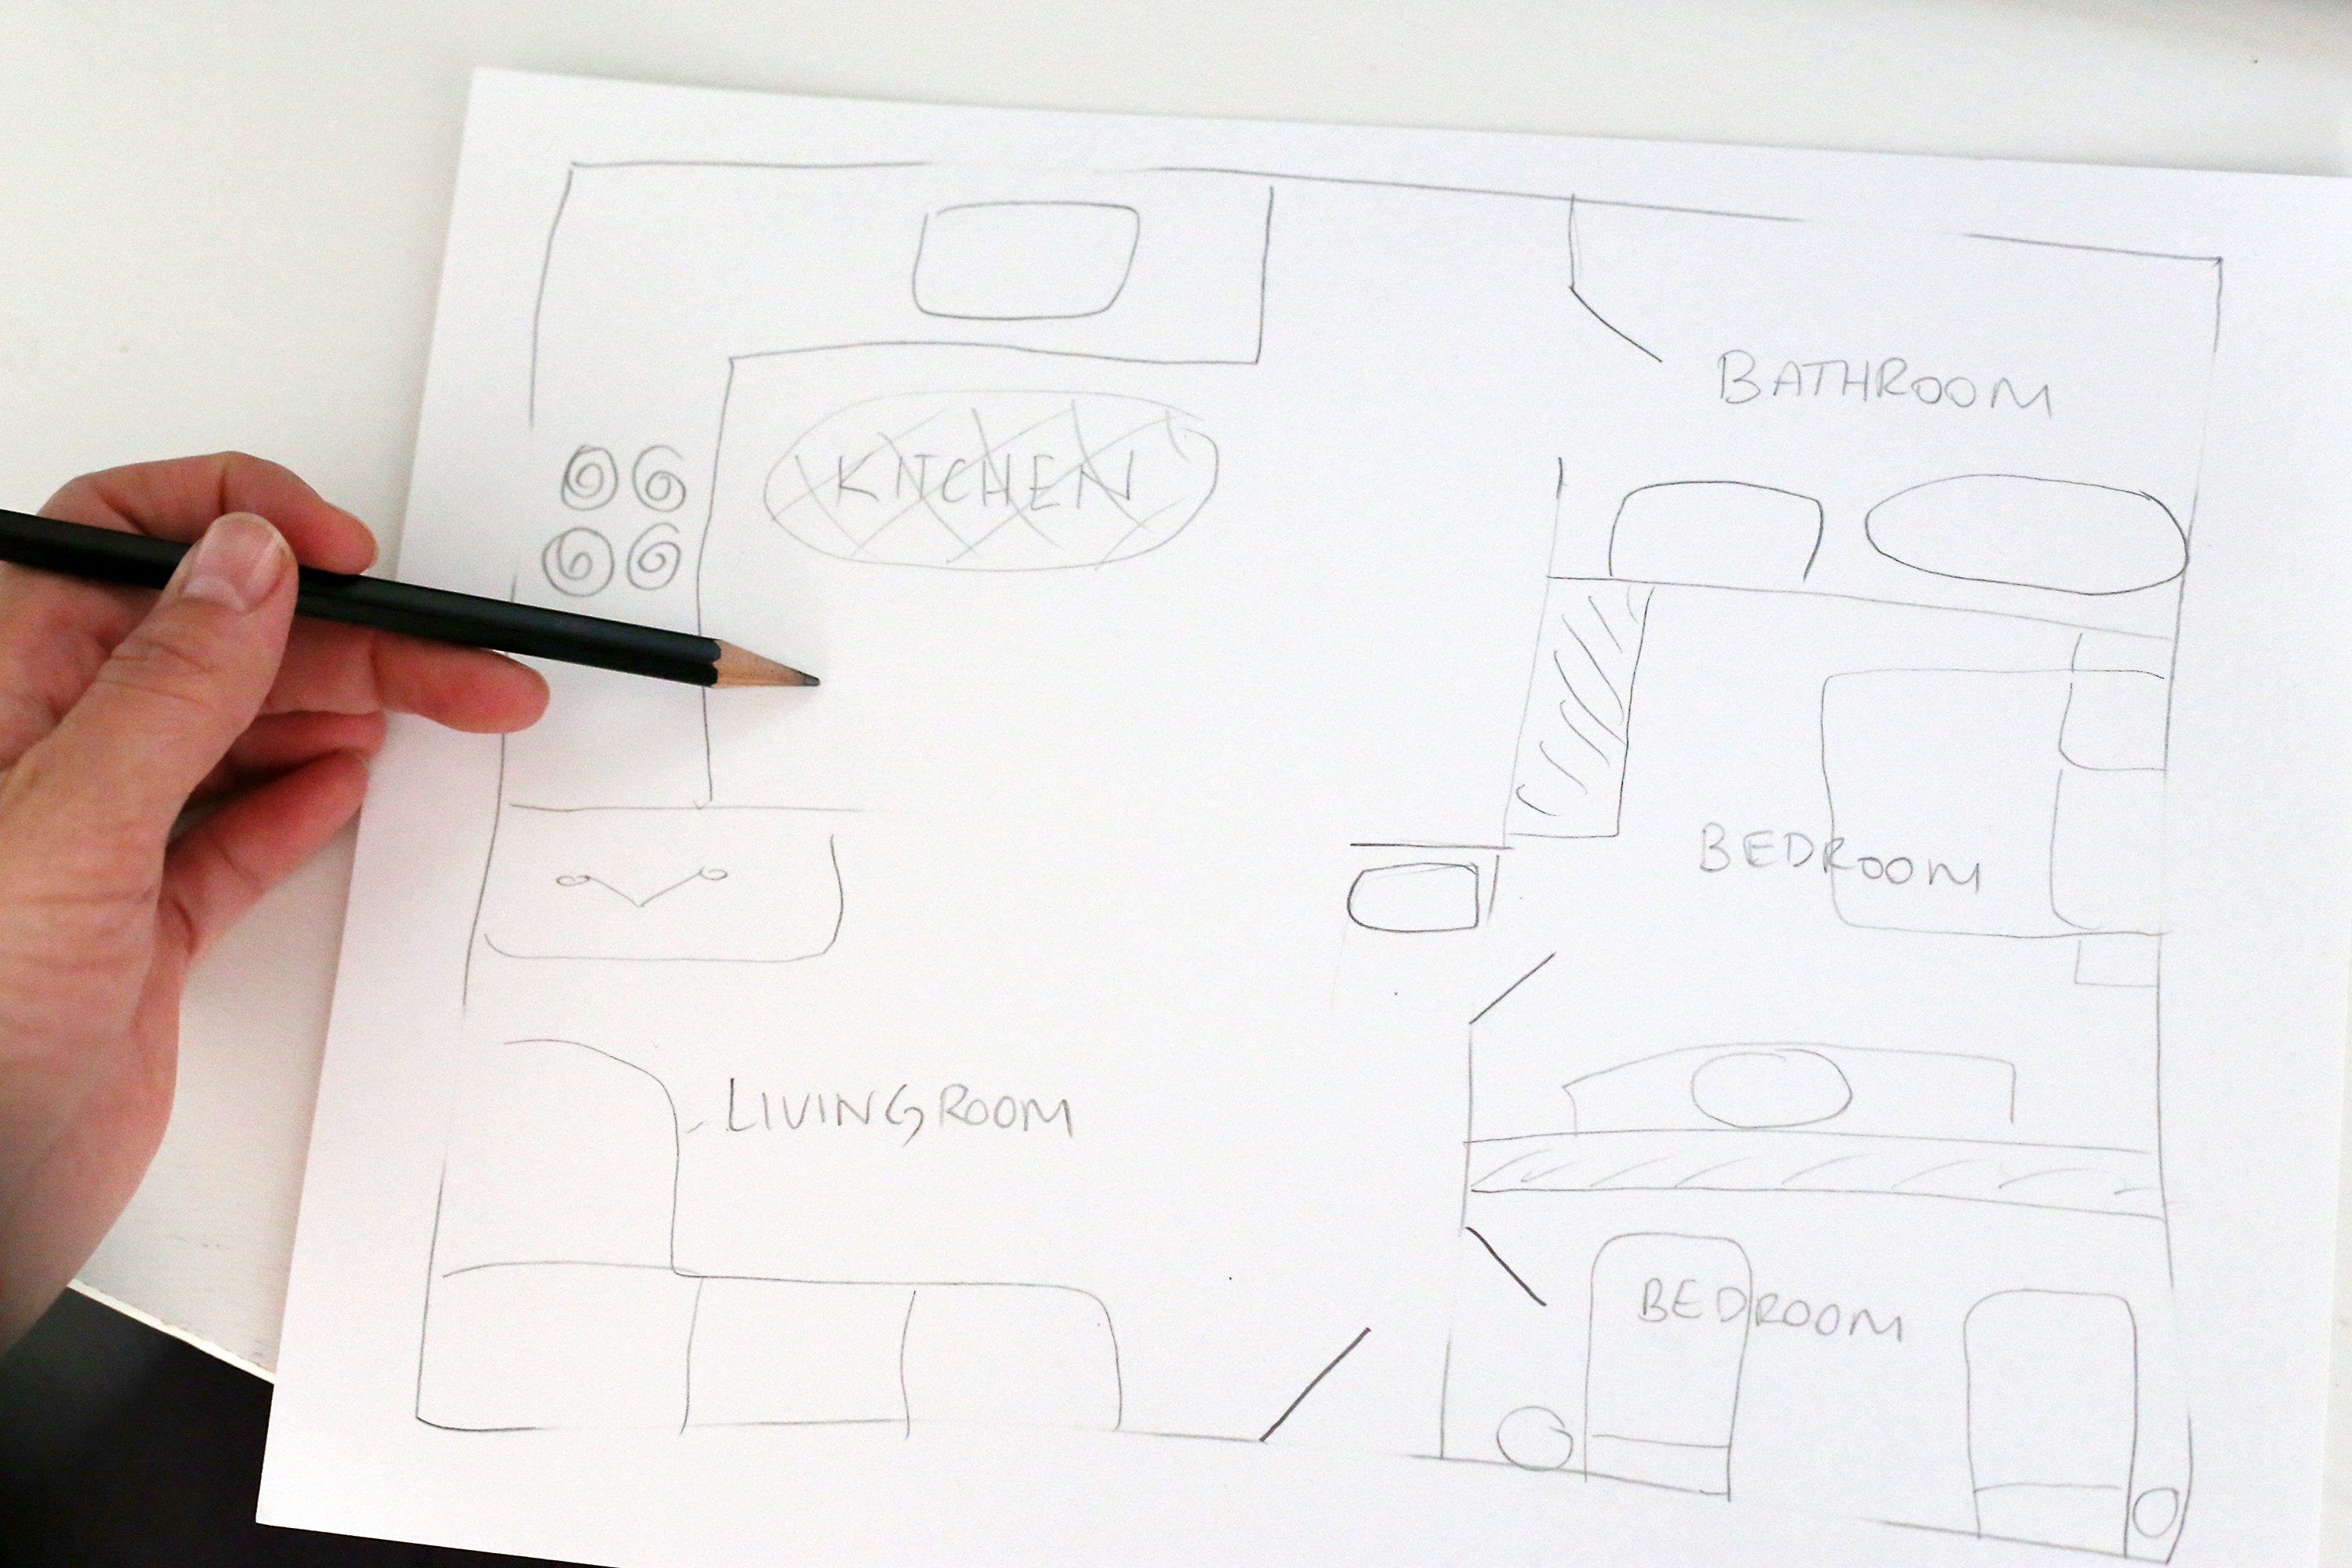 Creative How To Sketch Plan In A Drawing with simple drawing